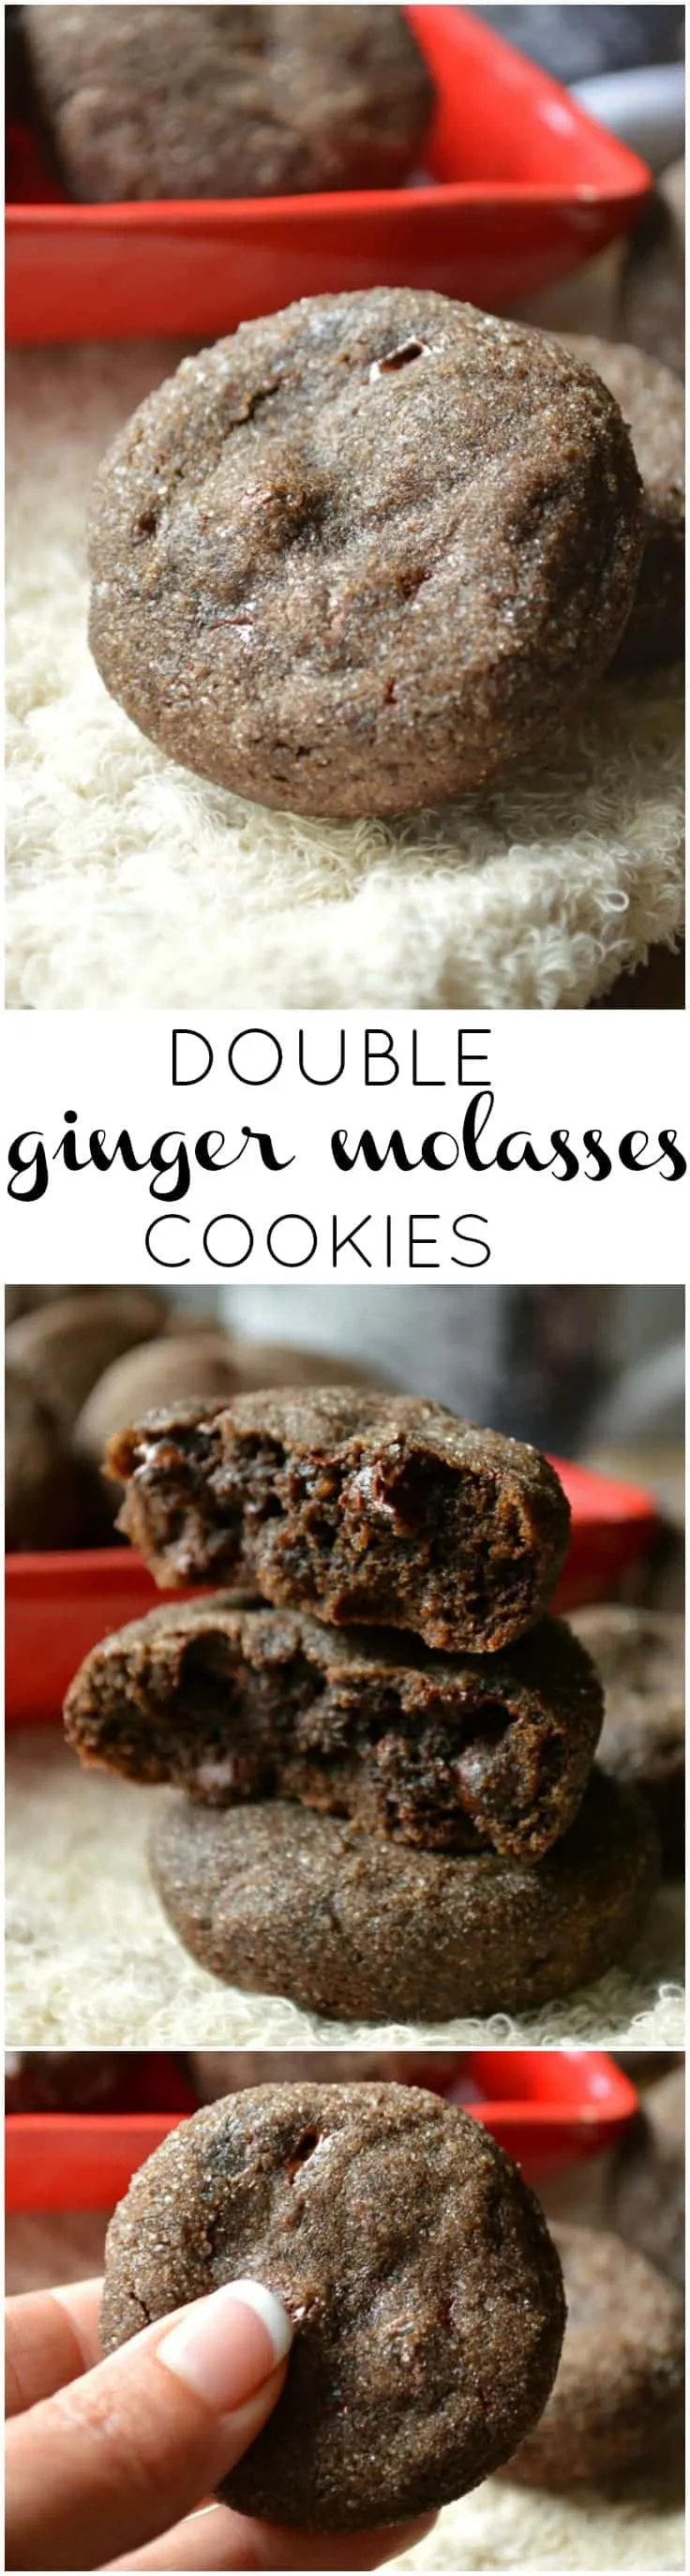 Double Ginger Molasses Cookies are soft and chewy, also studded with chocolate, rolled in sugar, and are ready to celebrate.